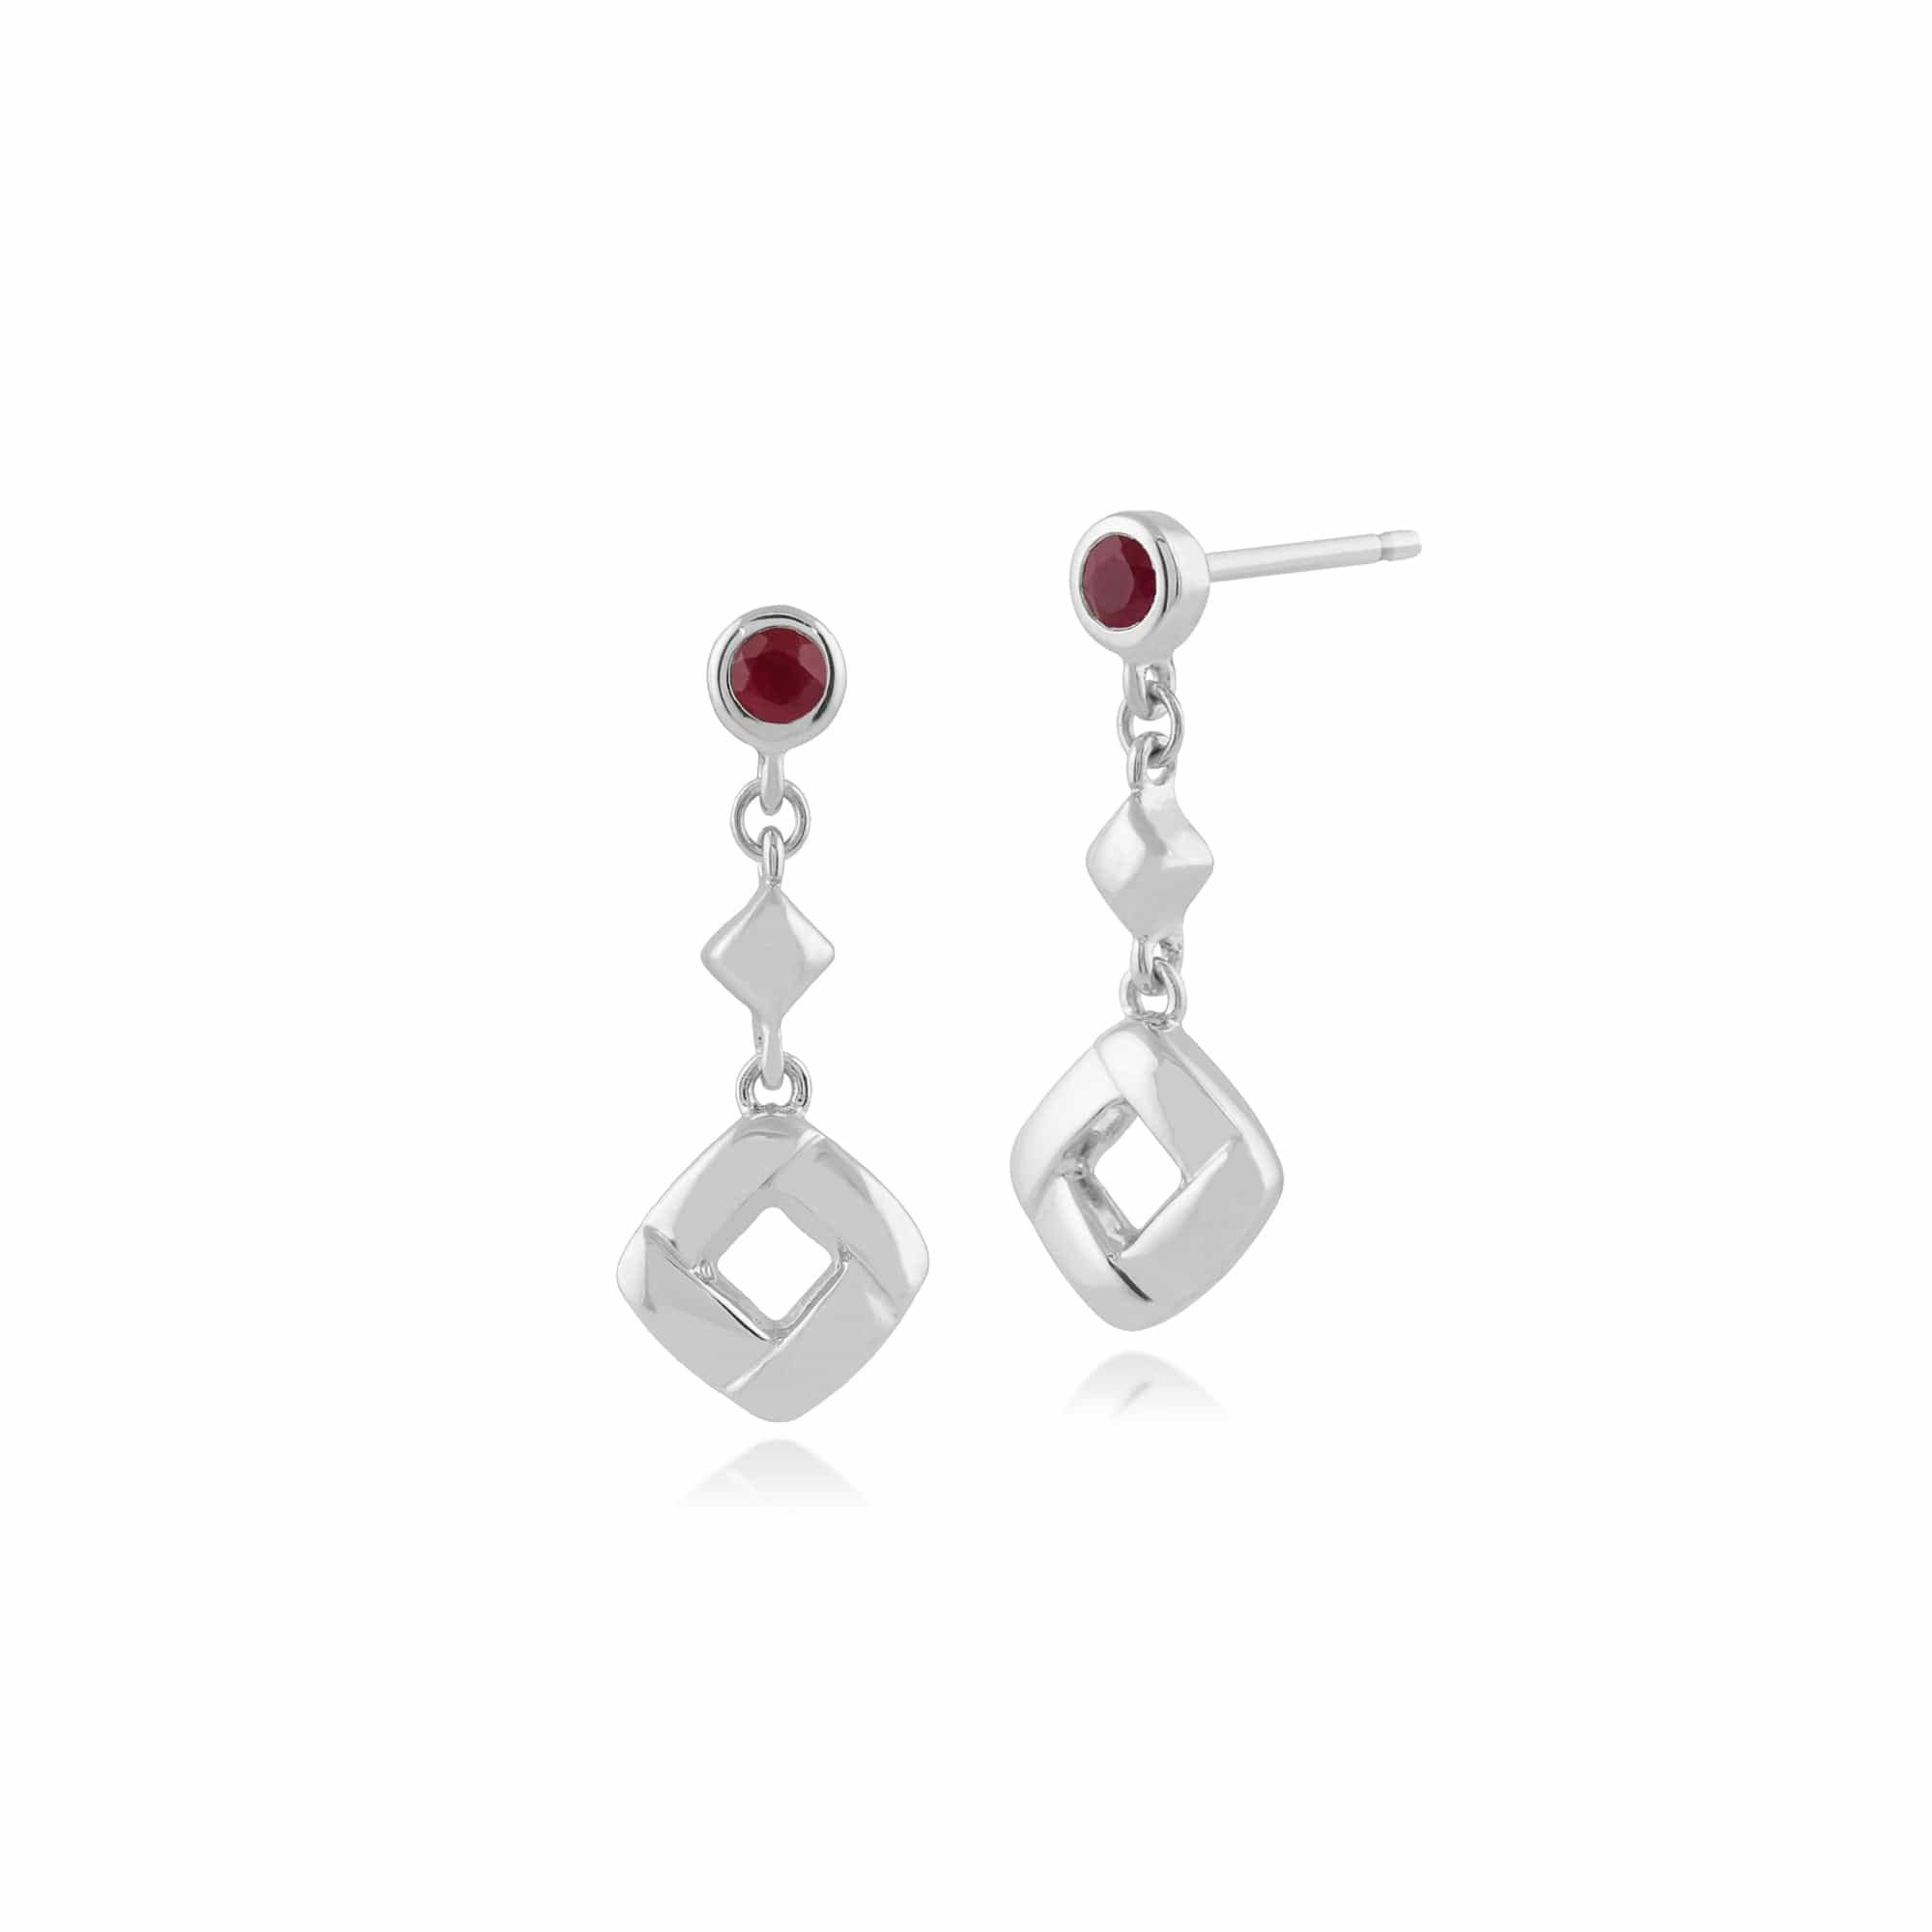 Classic Round Ruby Square Crossover Drop Earrings in 925 Sterling Silver - Gemondo